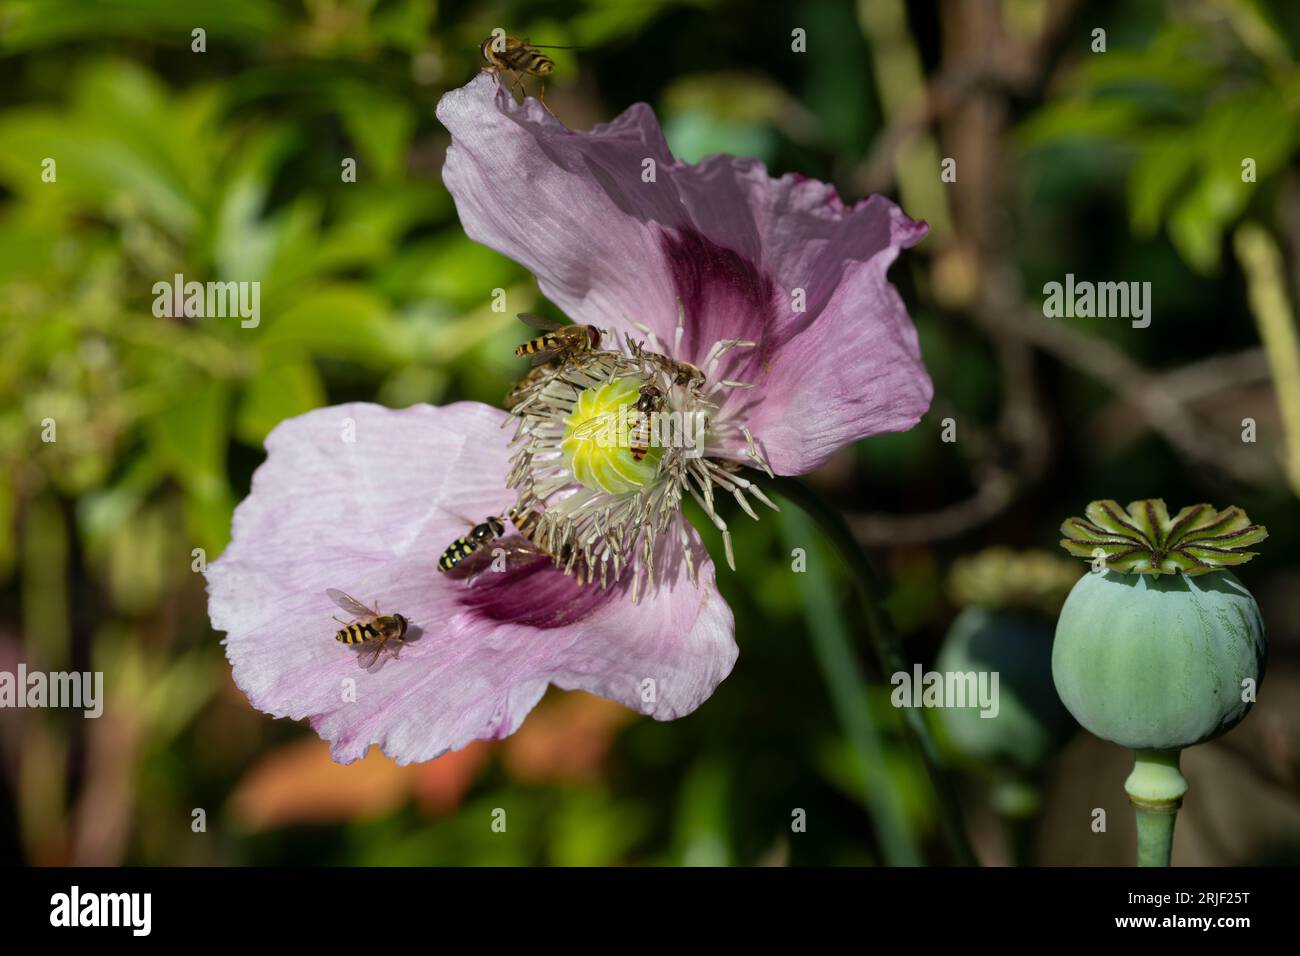 Opium poppy in flower pollinated by insects in a garden in summer, England, United Kingdom Stock Photo